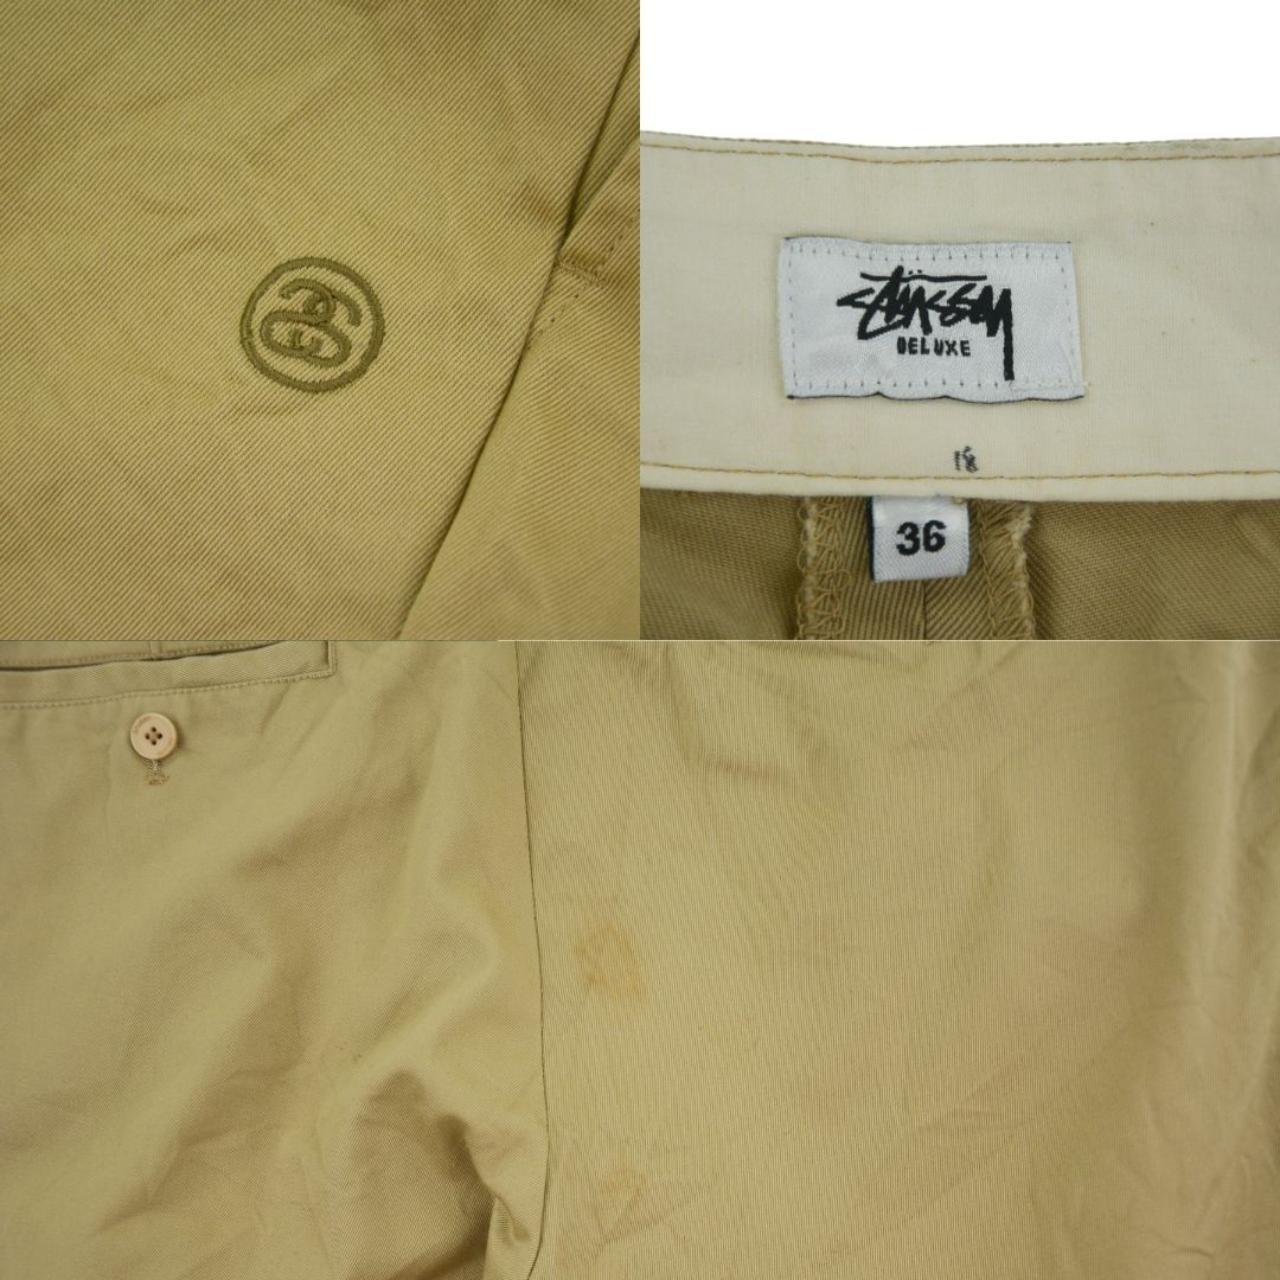 Vintage Stussy Deluxe Shorts Size W36 - Known Source